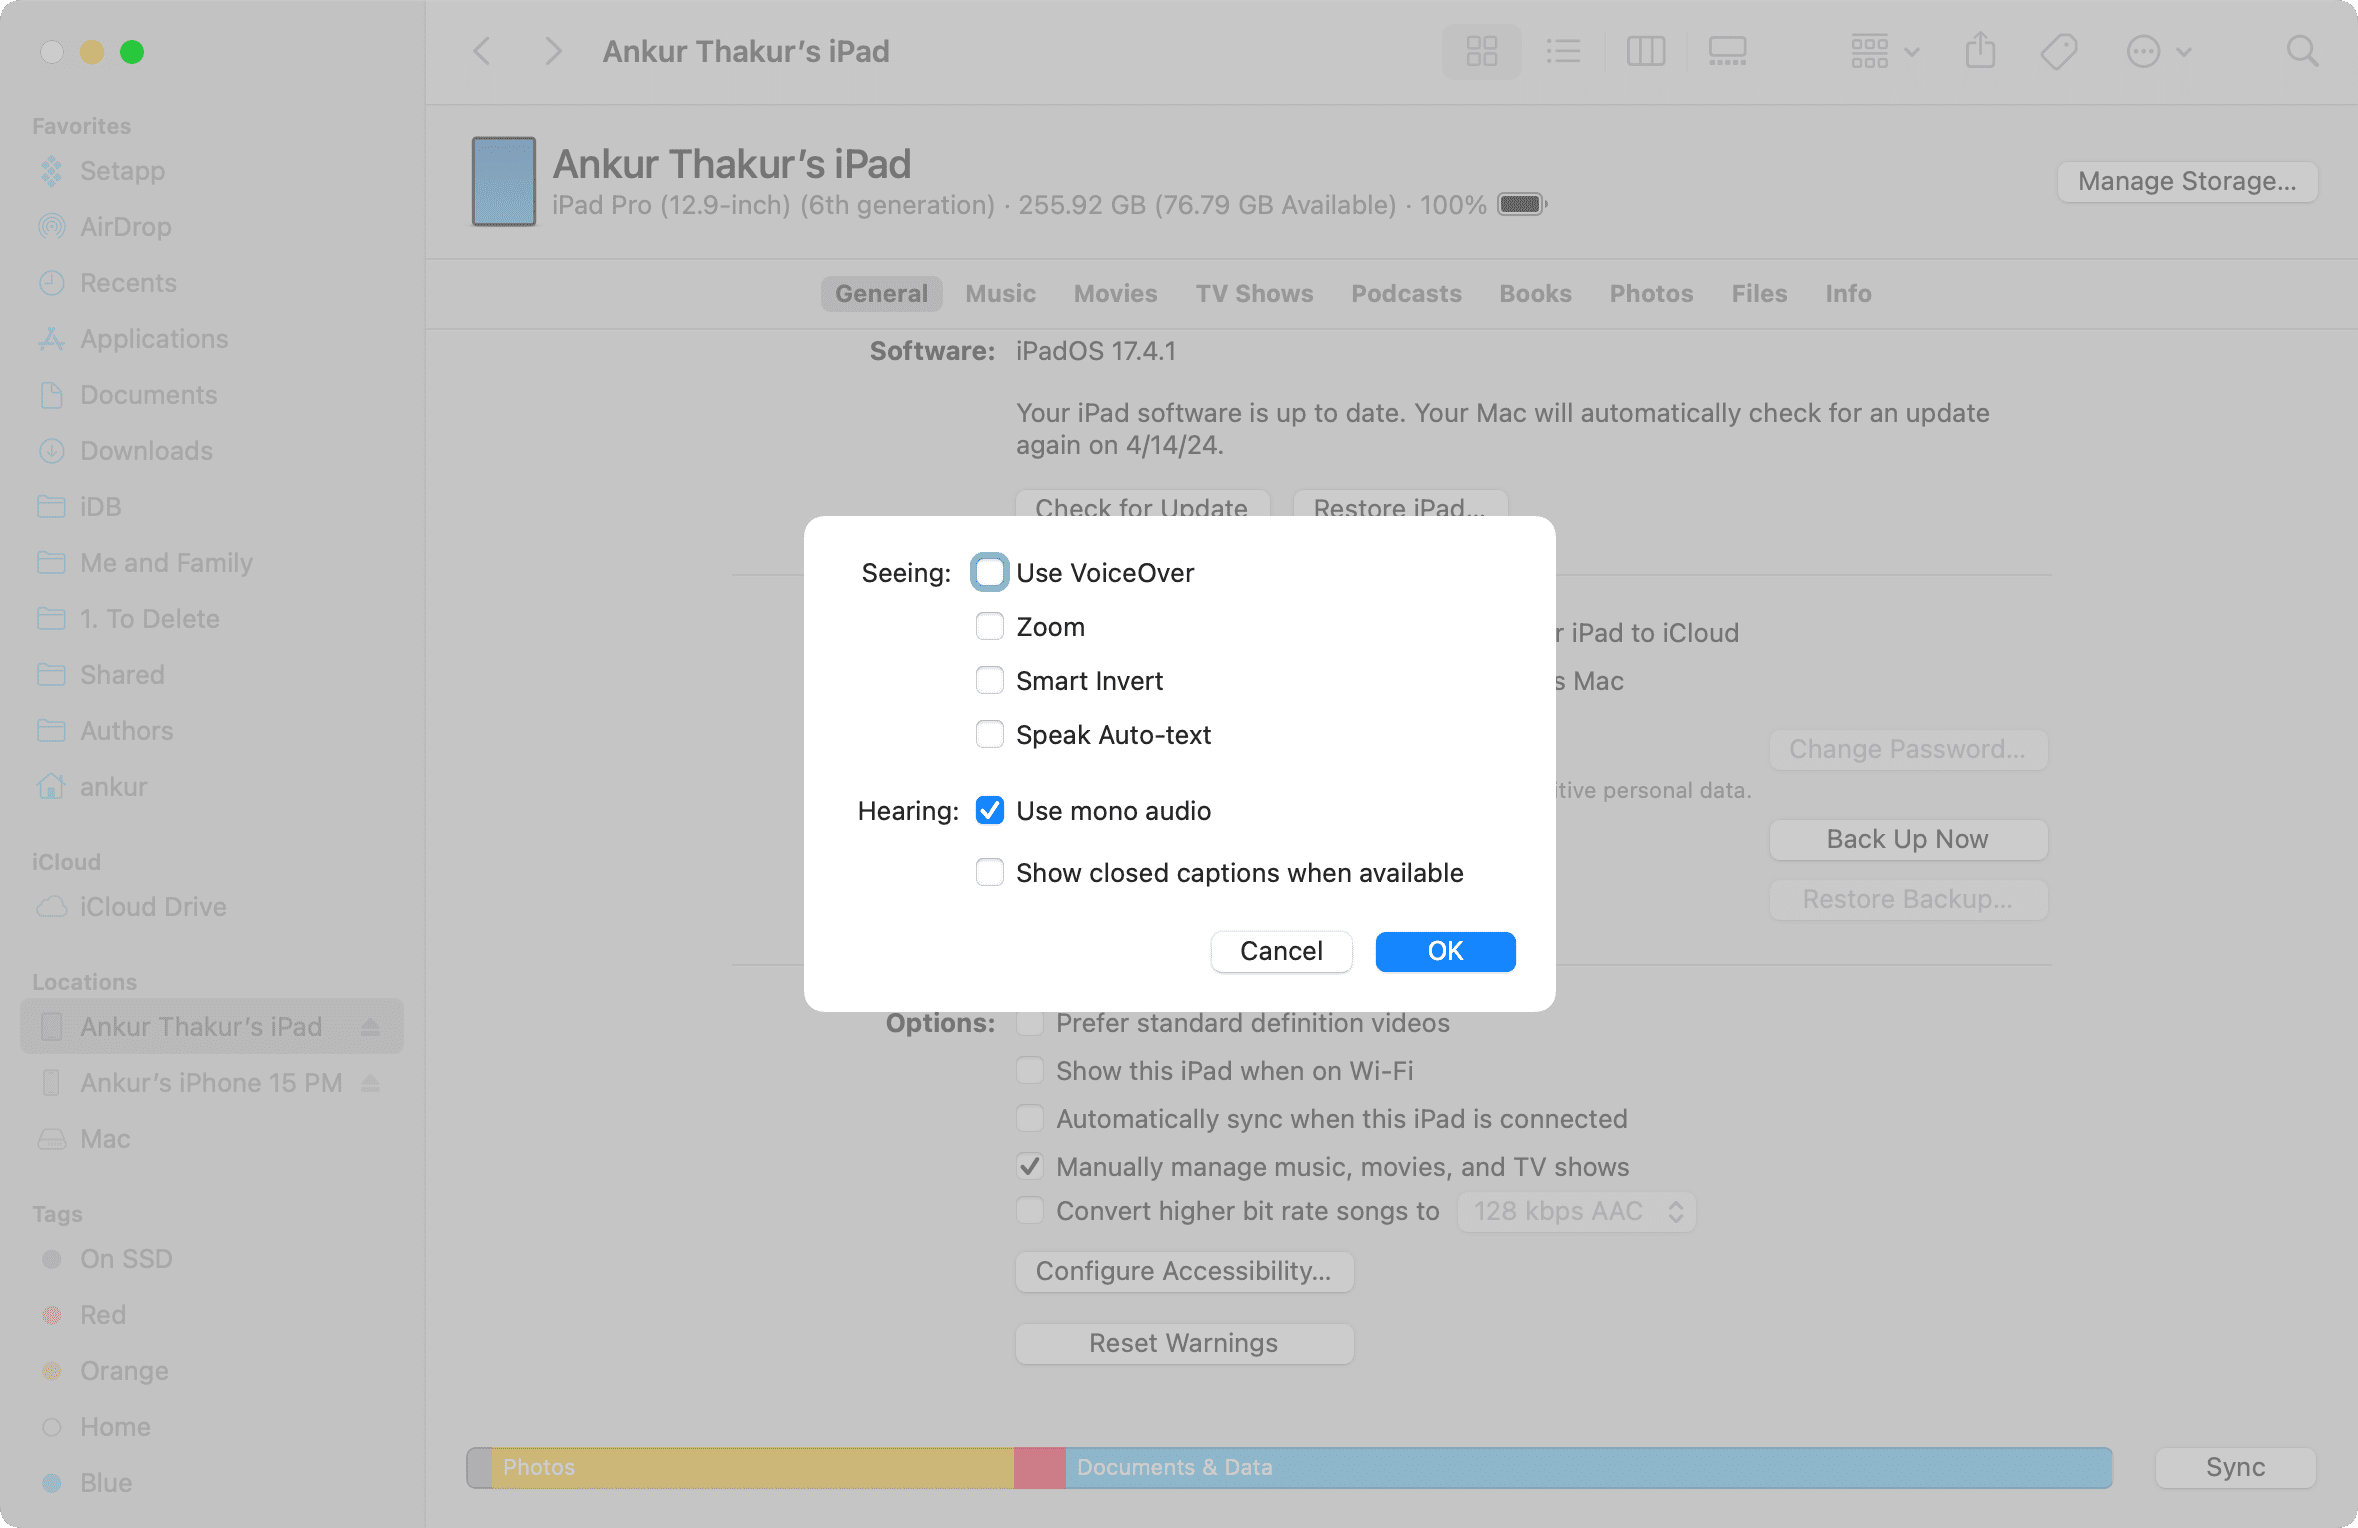 Configure Accessibility for iOS device in Finder on Mac